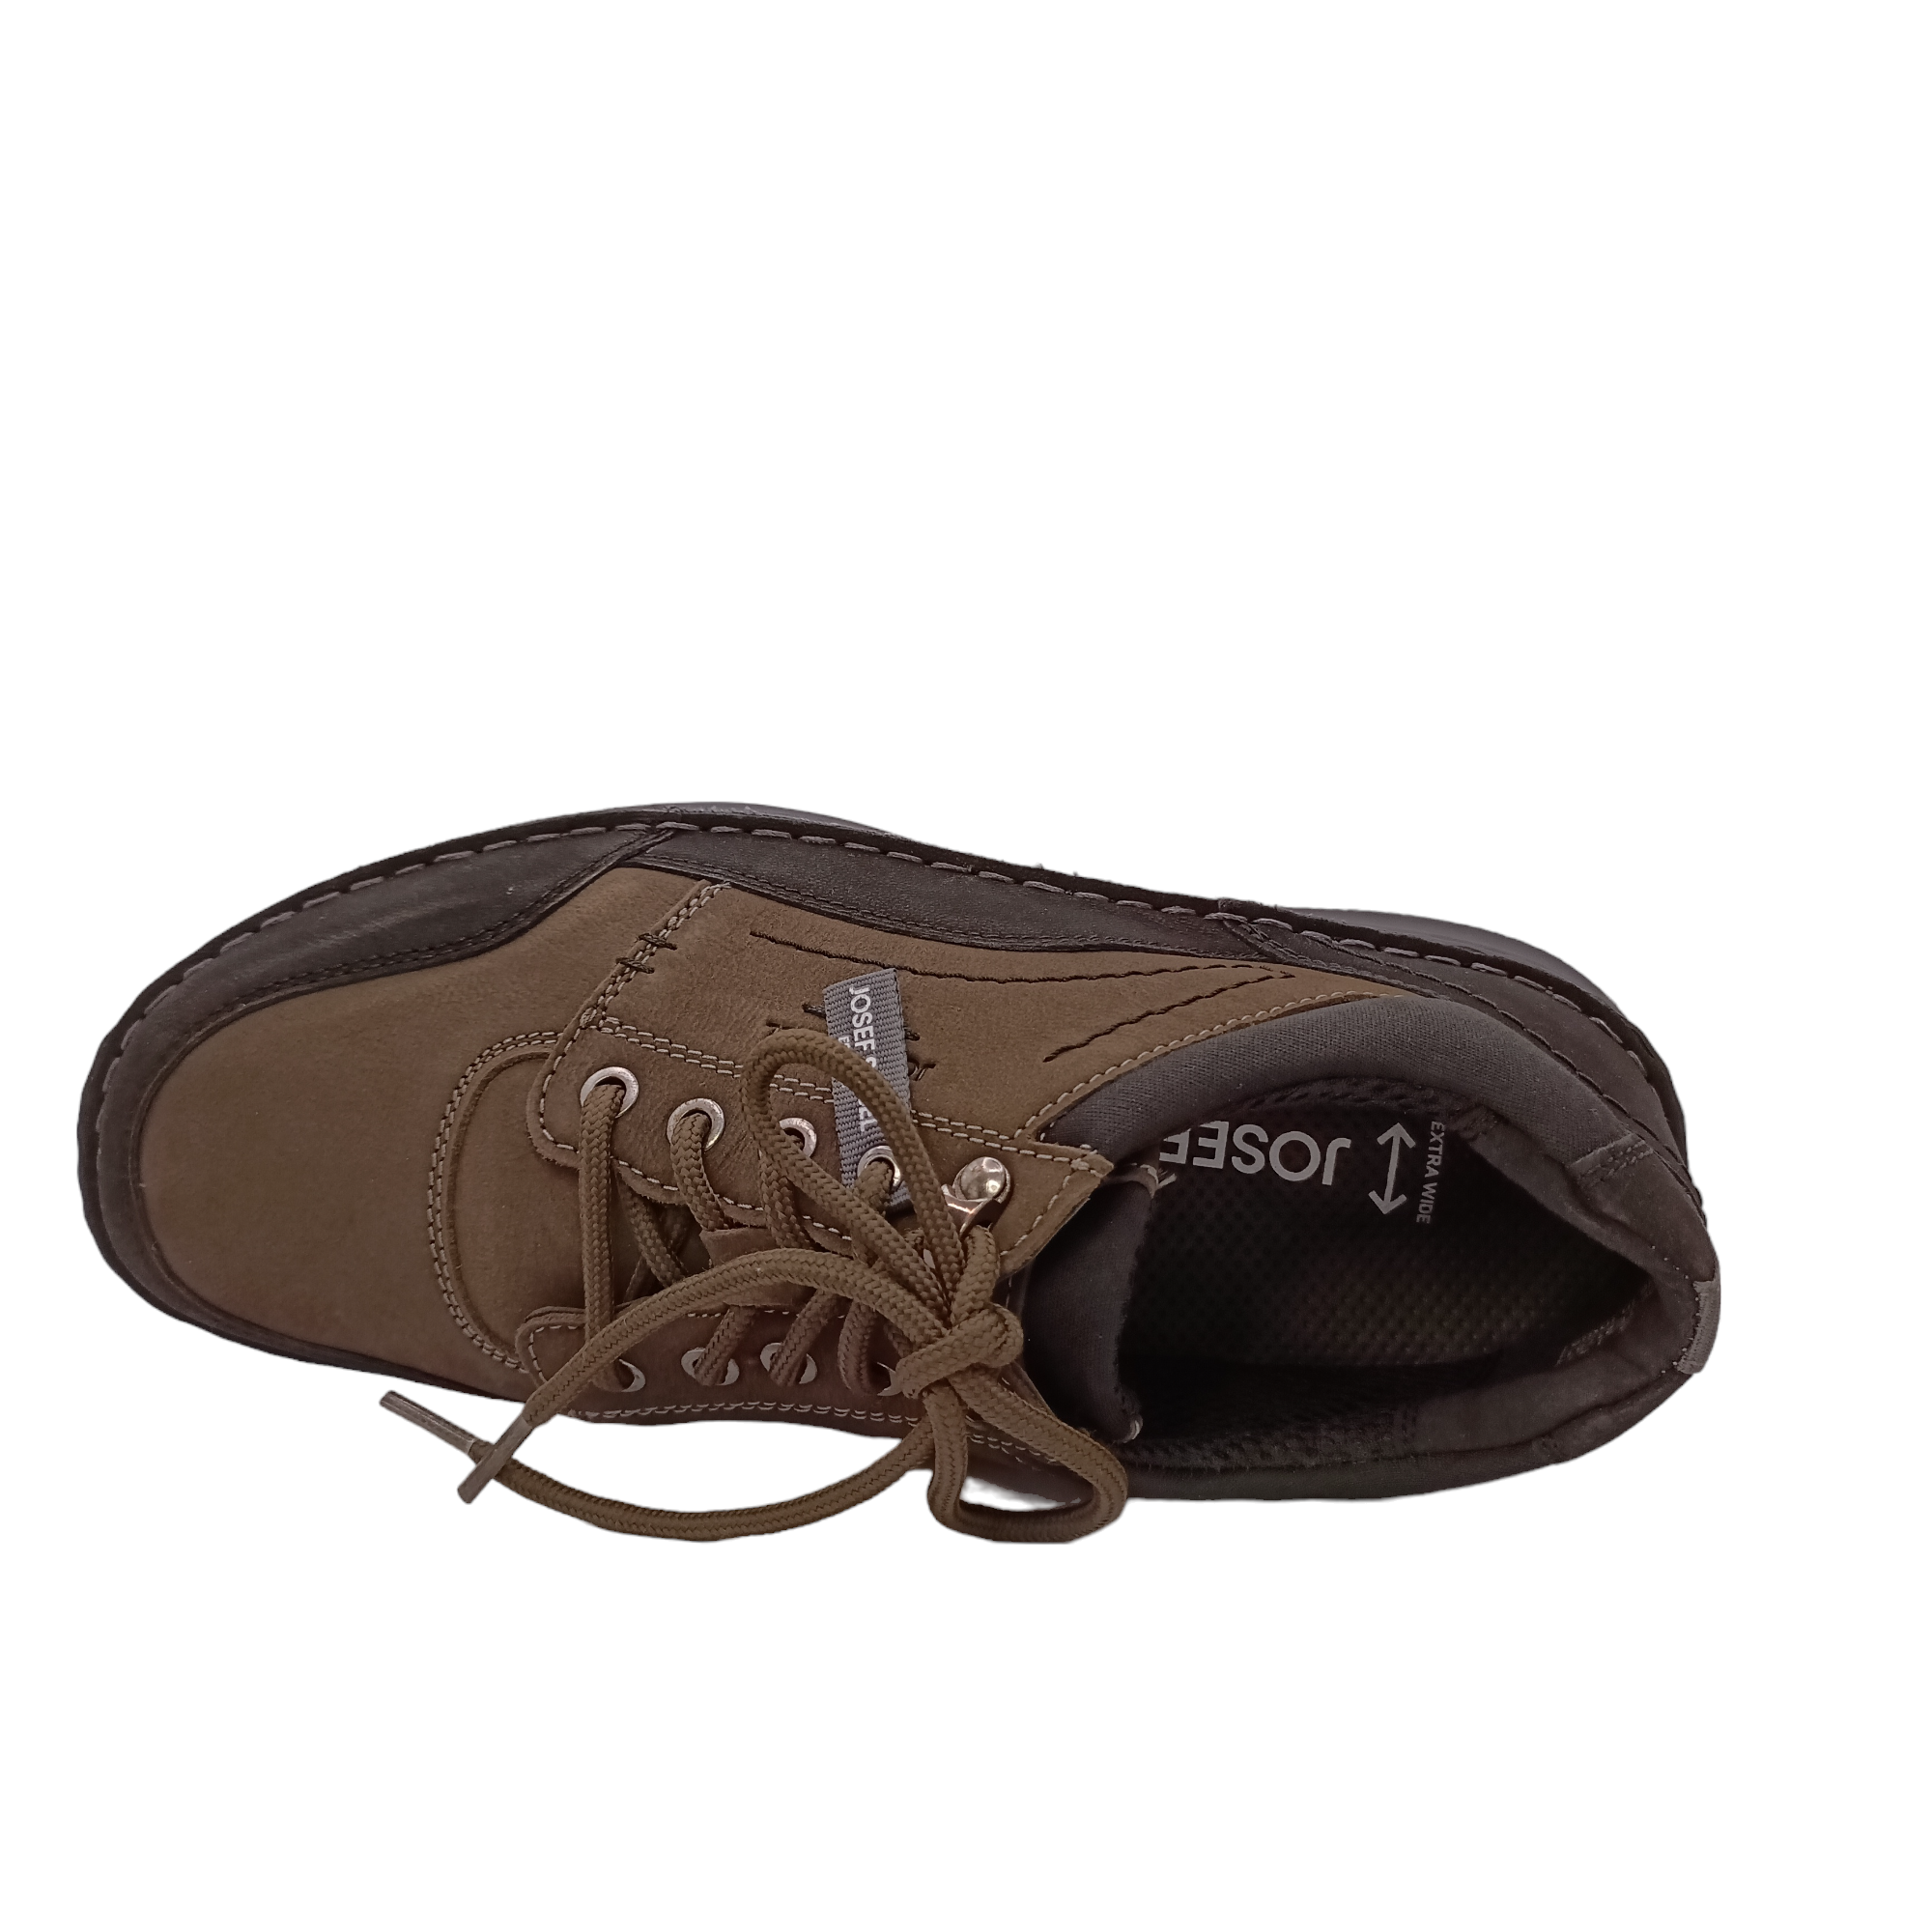 Shop Anvers 98 Josef Seibel - with shoe&me - from Josef Seibel - Shoes - Mens, shoes, Winter - [collection]